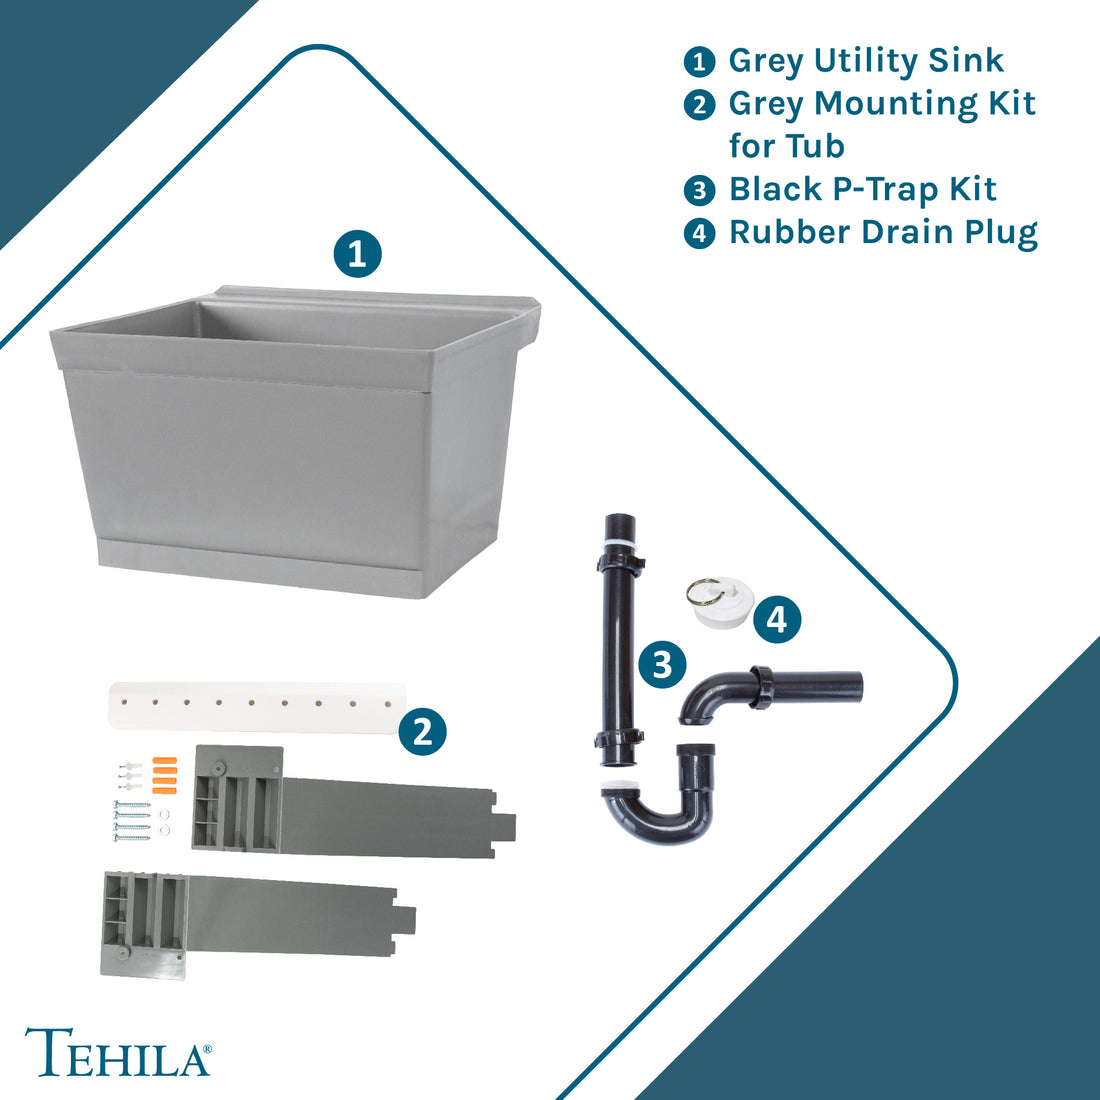 Grey Standard Utility Sink Contents  | Grey Mounting Kit for Tub | Black P-Trap Kit | Rubber Drain Plug